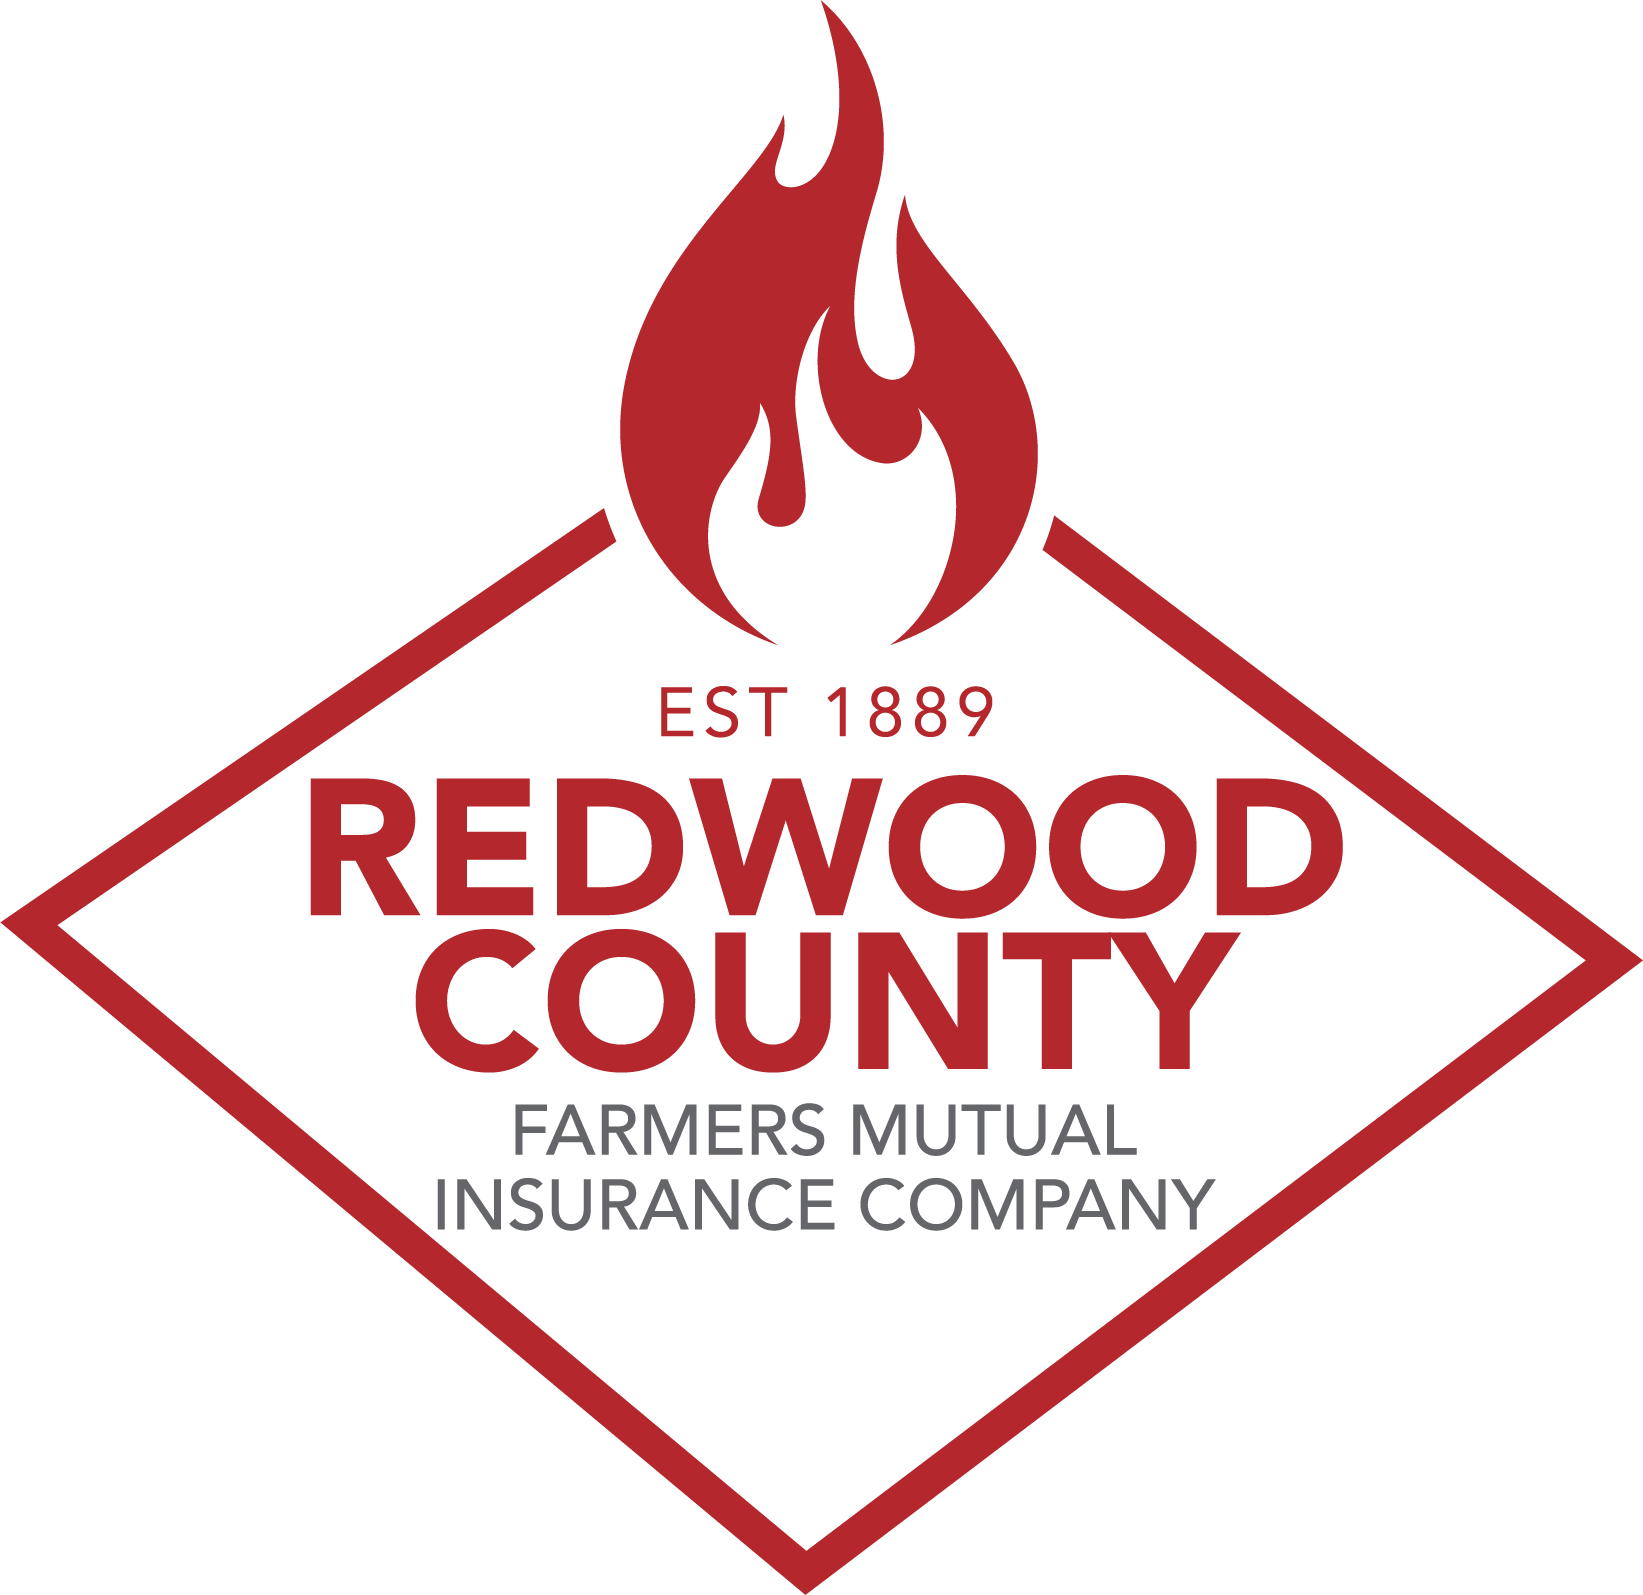 <h1 class="tribe-events-single-event-title">Redwood County Farmers Mutual Insurance Company Annual Meeting</h1>